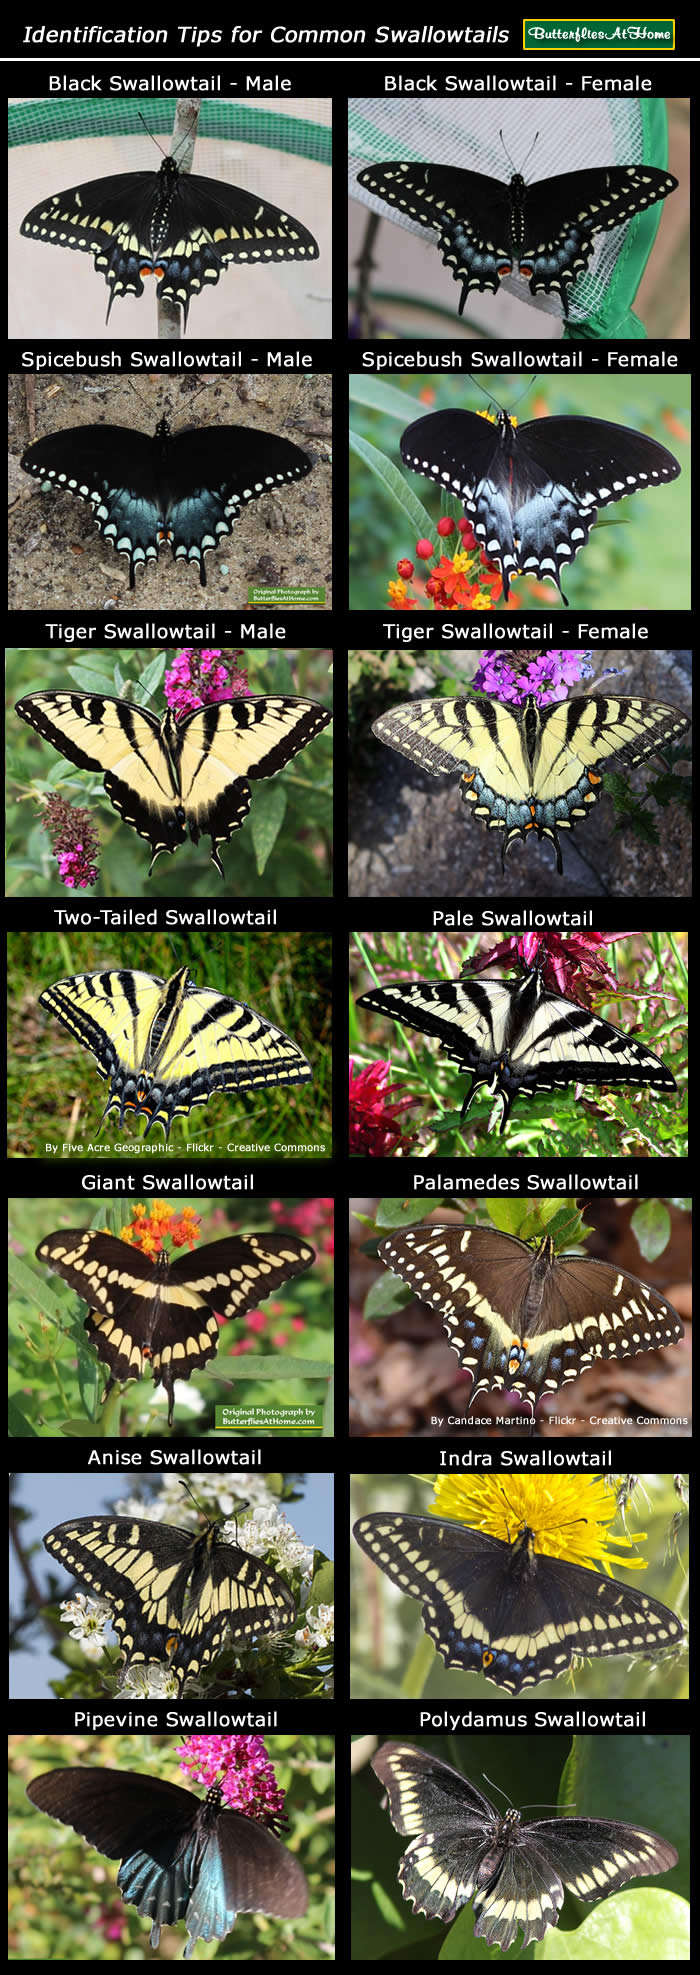 click for identification tips for the Swallowtail family of butterflies